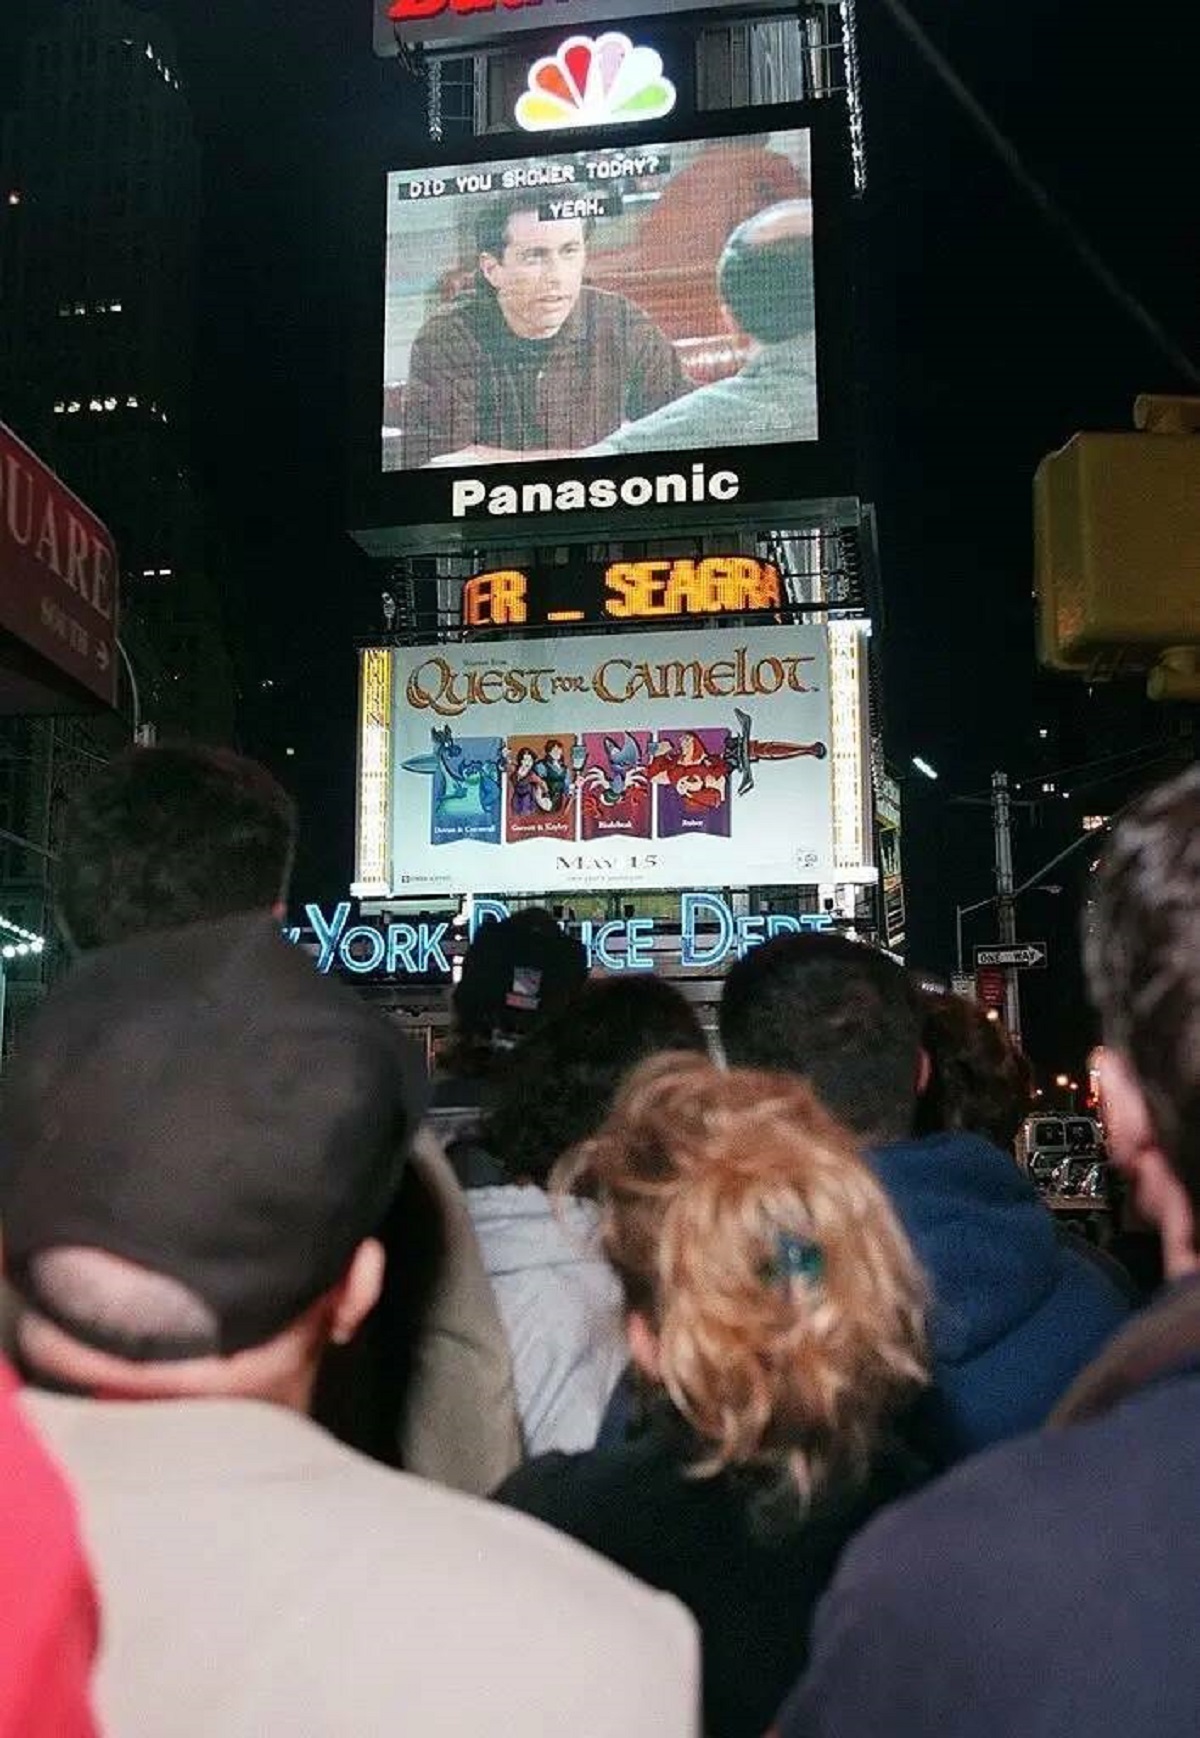 On May 14, 1999, crowds gathered in New York's Times Square to watch the final episode of Seinfeld: